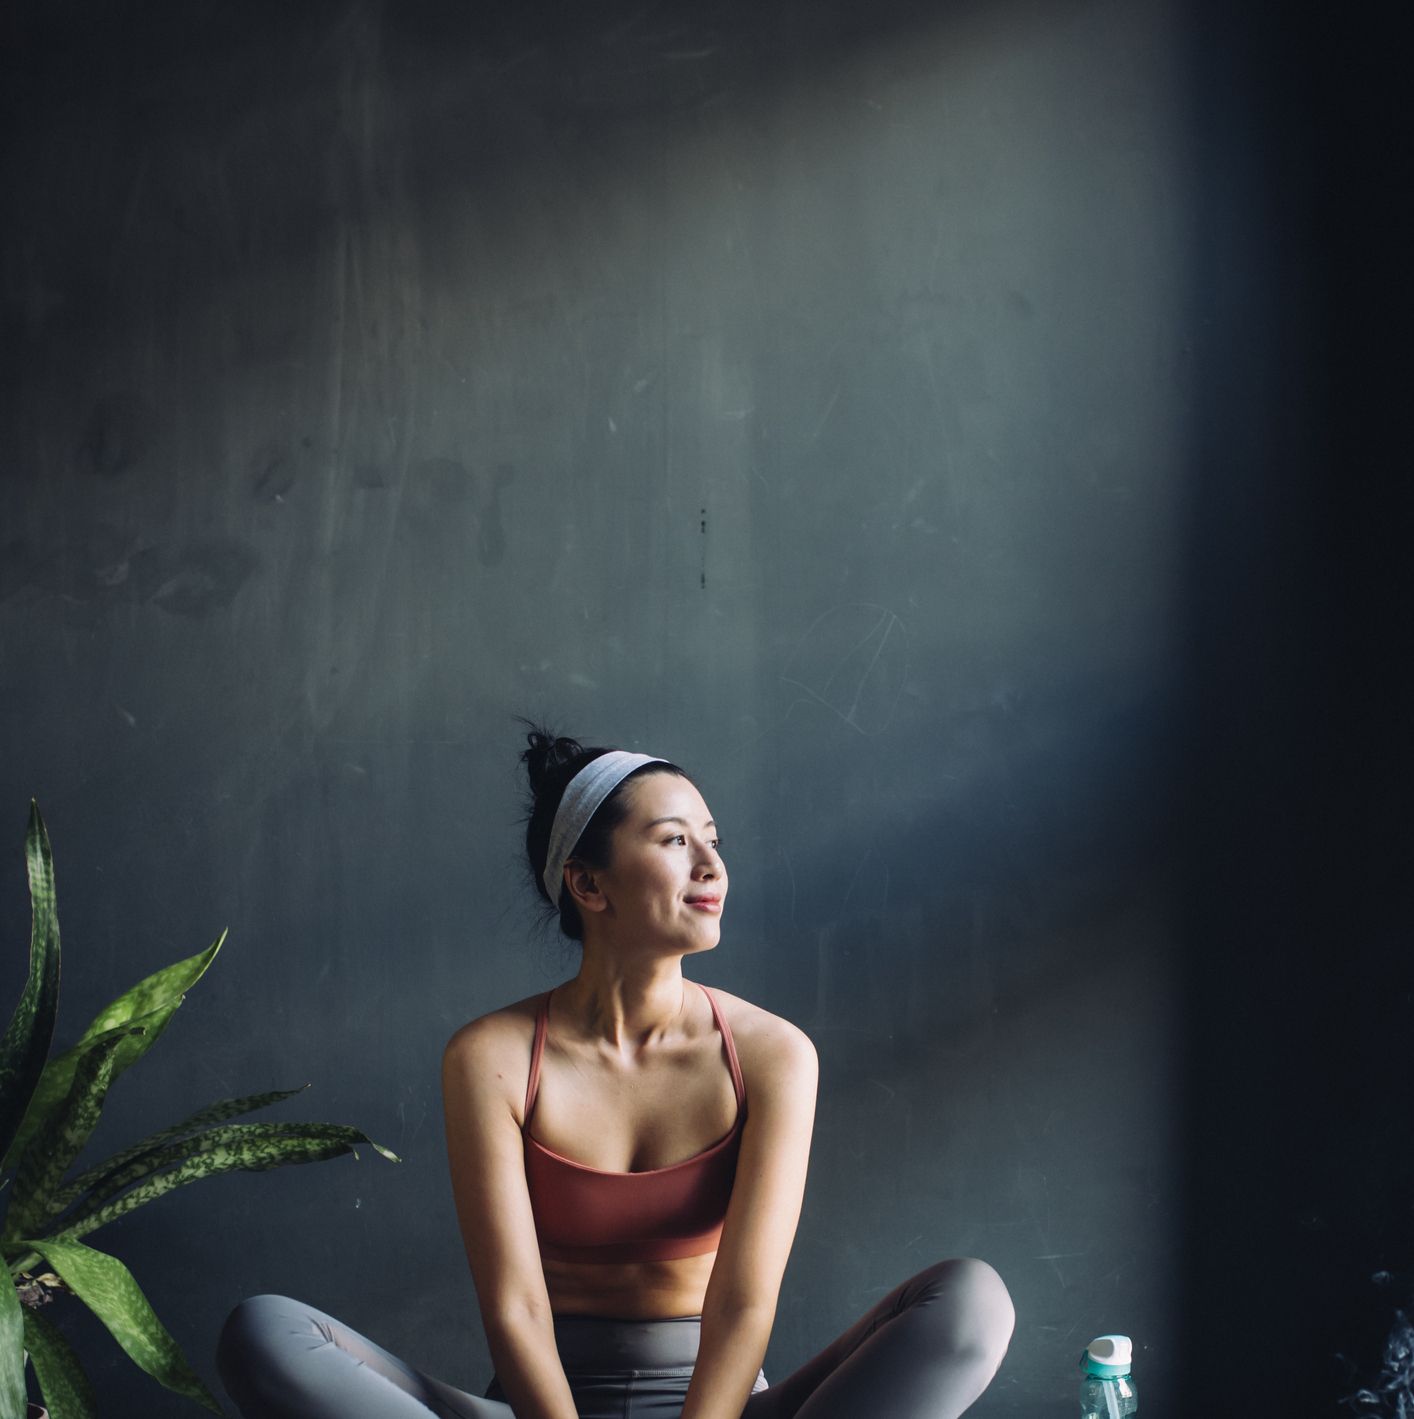 9 Yin Yoga Poses That Will Feel So Good on Your Low Back